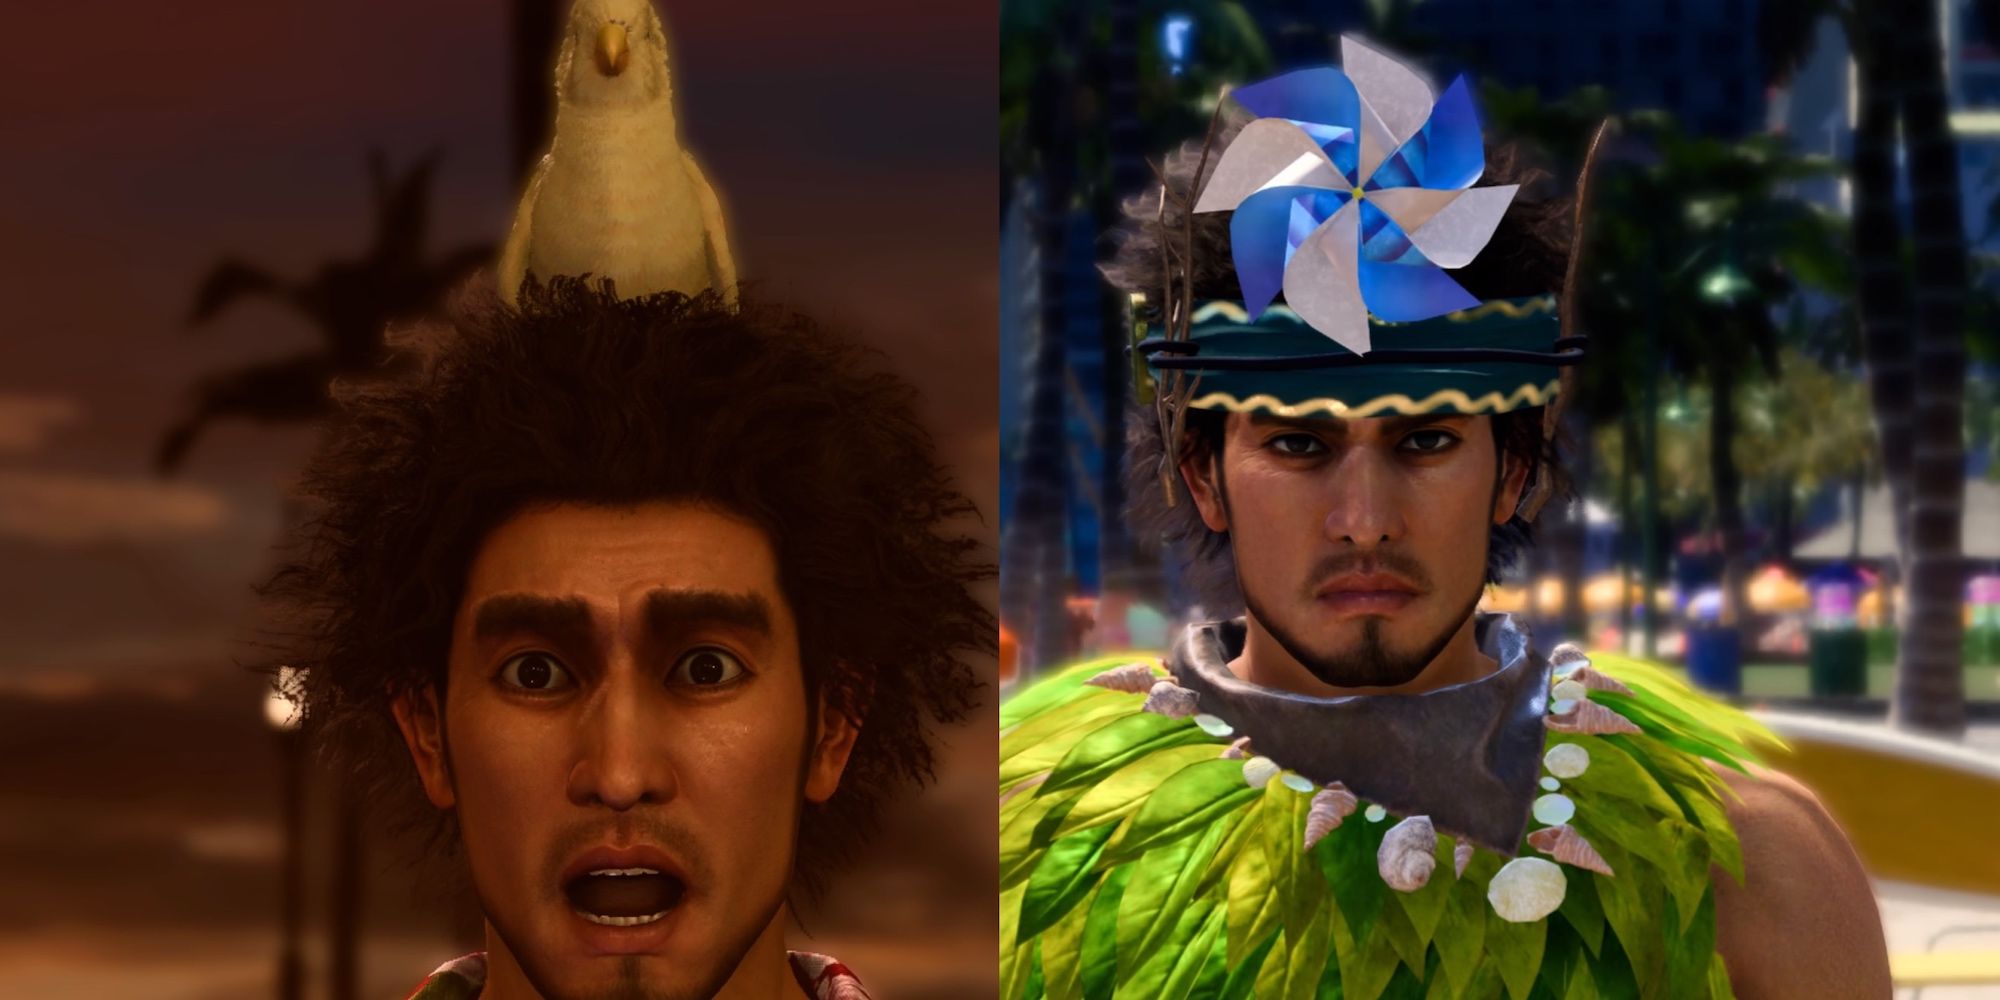 Kasuga surprised with a bird on his head on the left and Kasuga dressed as a shaman on the right.